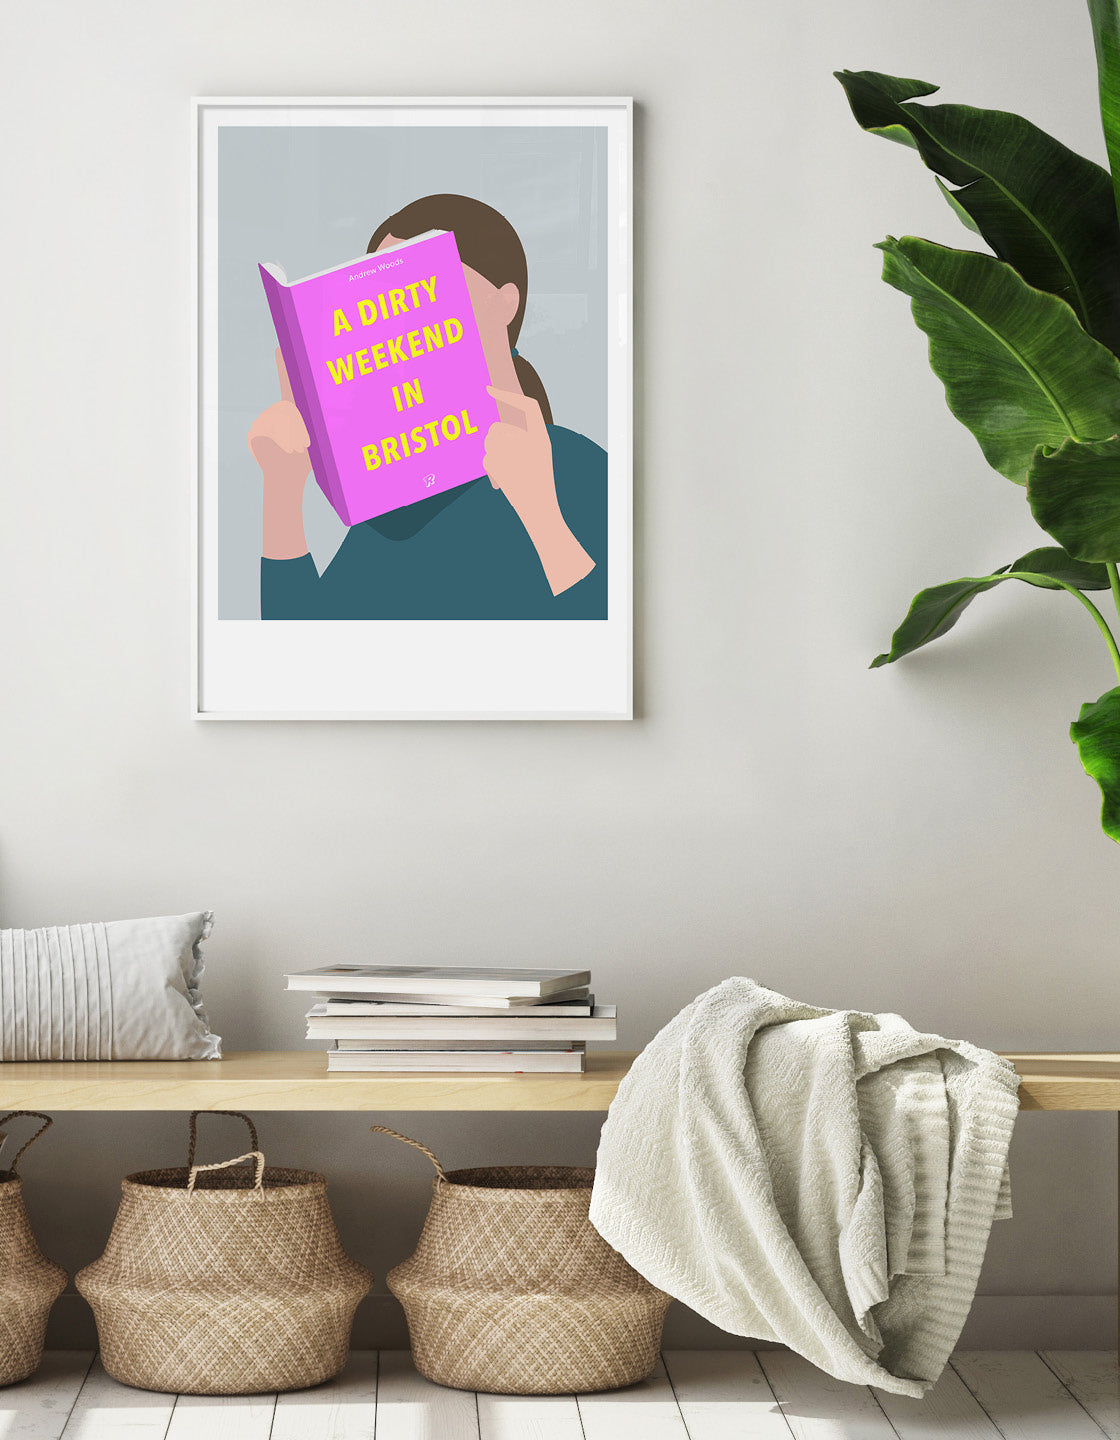 Minimal art print depicting a white person with their head in a book, reading. The book cover can be Personalised, this one has a bright and eye catching design